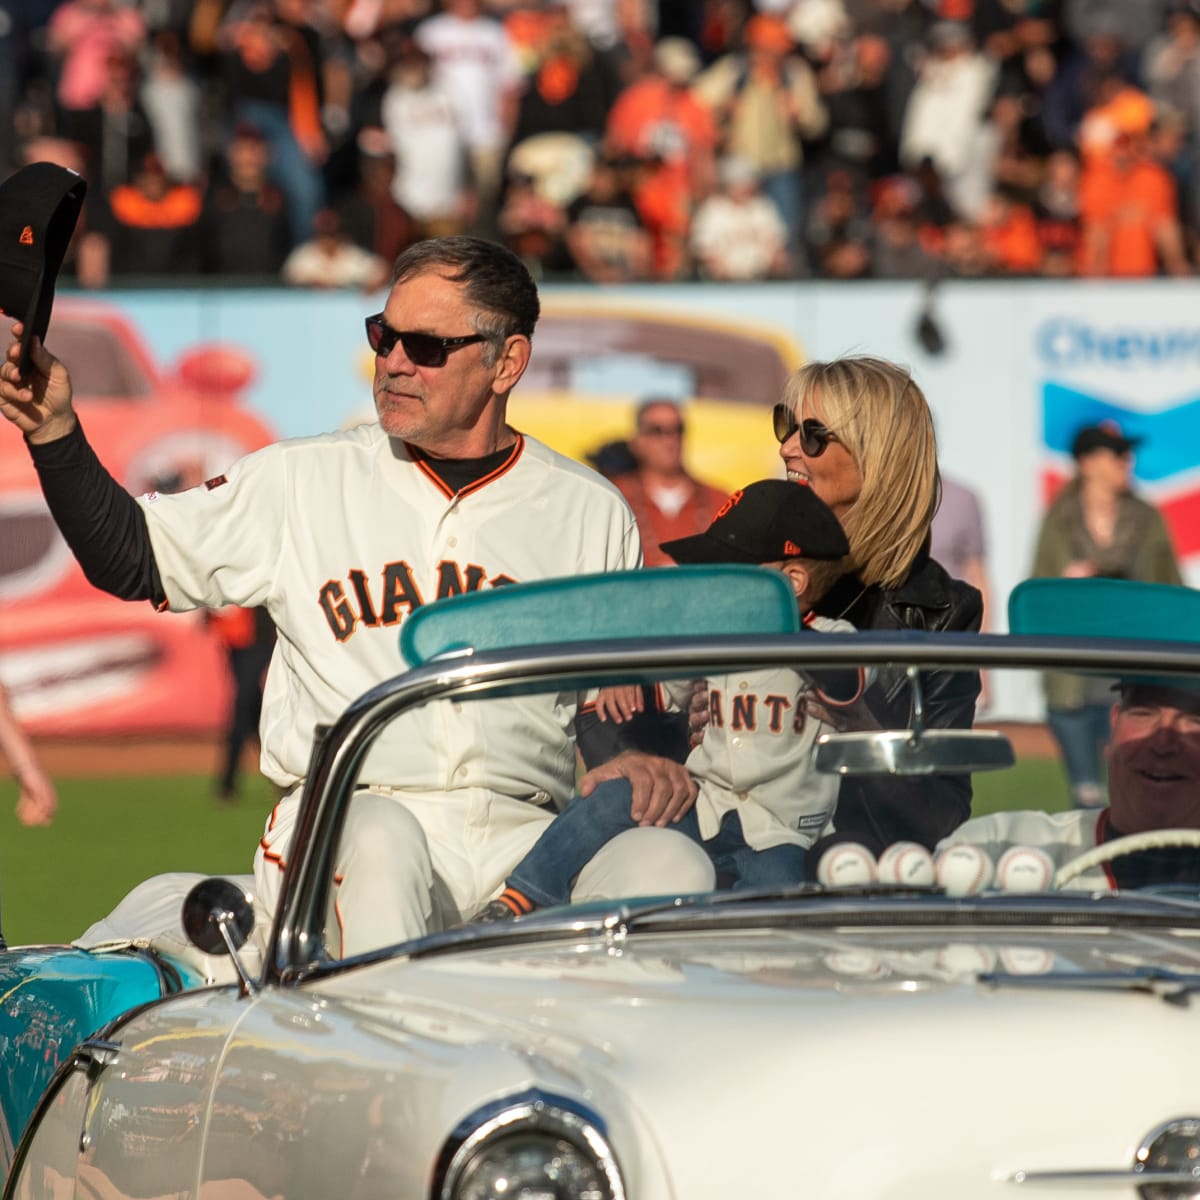 Back in San Francisco, Bruce Bochy reminisces on storied SF Giants tenure